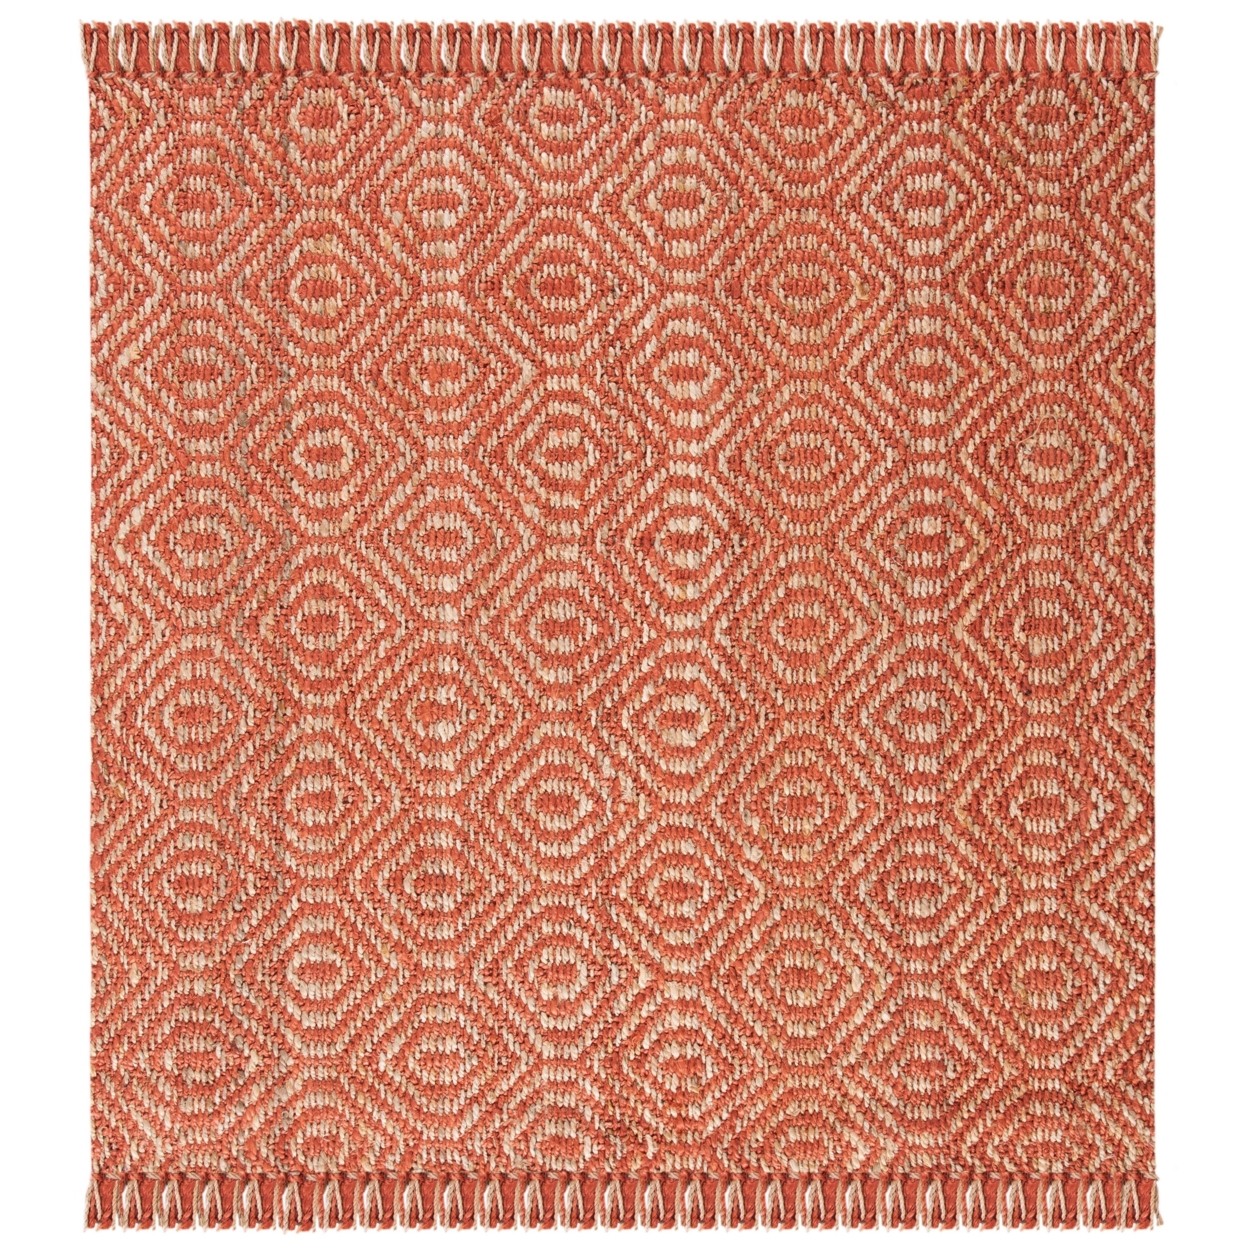 SAFAVIEH Natural Fiber NF445A Handwoven Rust Rug - 9' Square